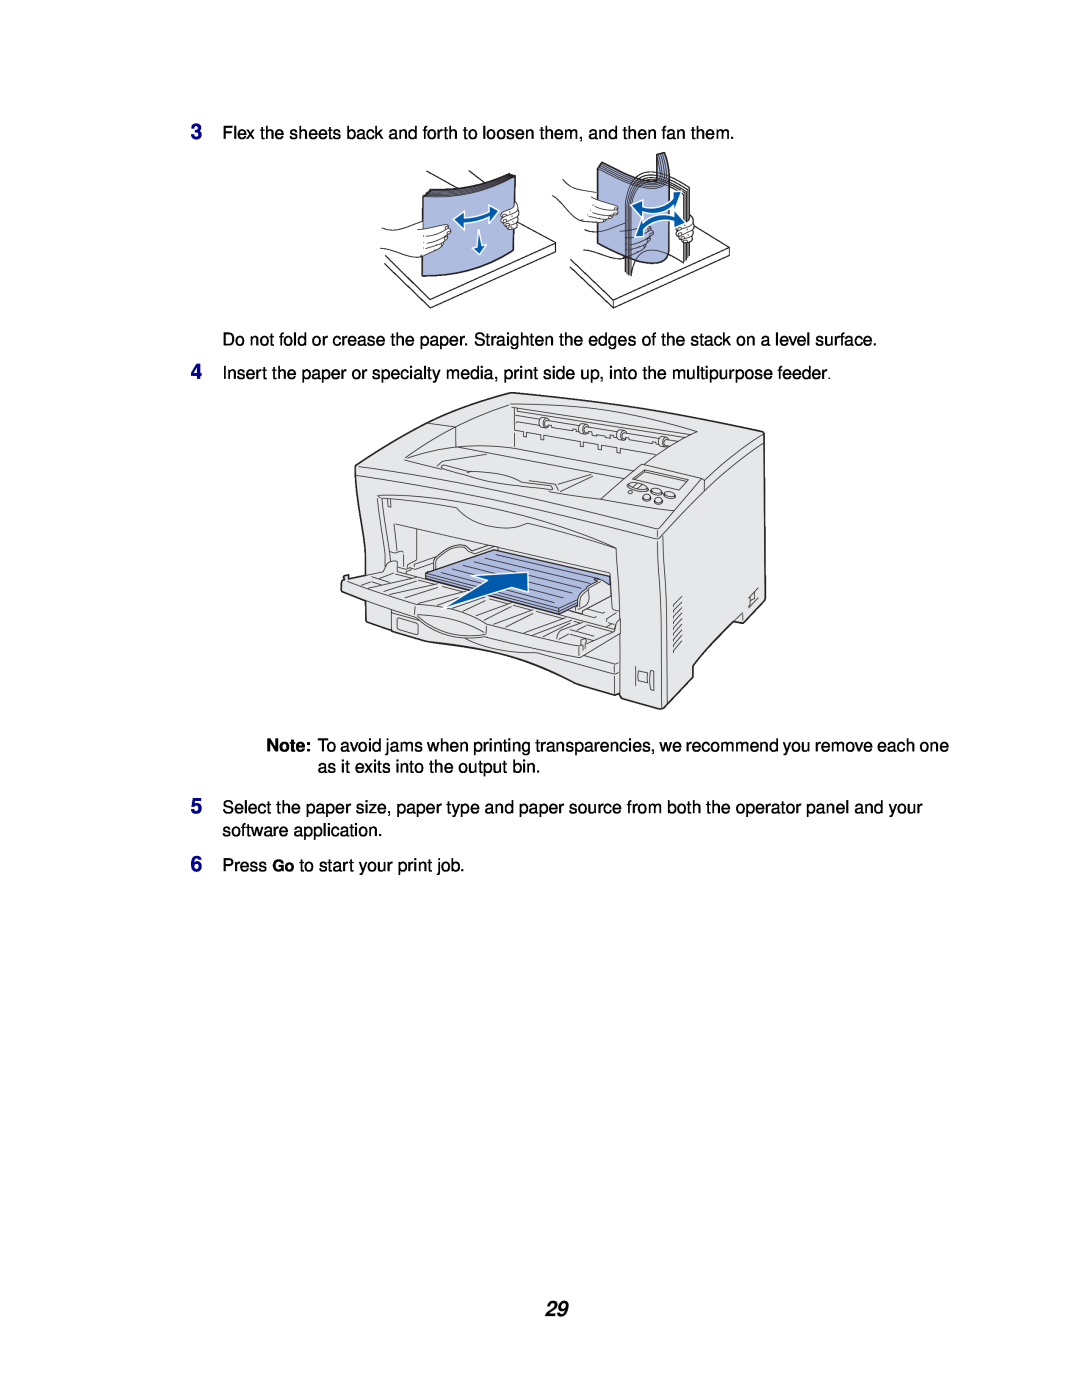 Lexmark 812 manual Flex the sheets back and forth to loosen them, and then fan them, Press Go to start your print job 